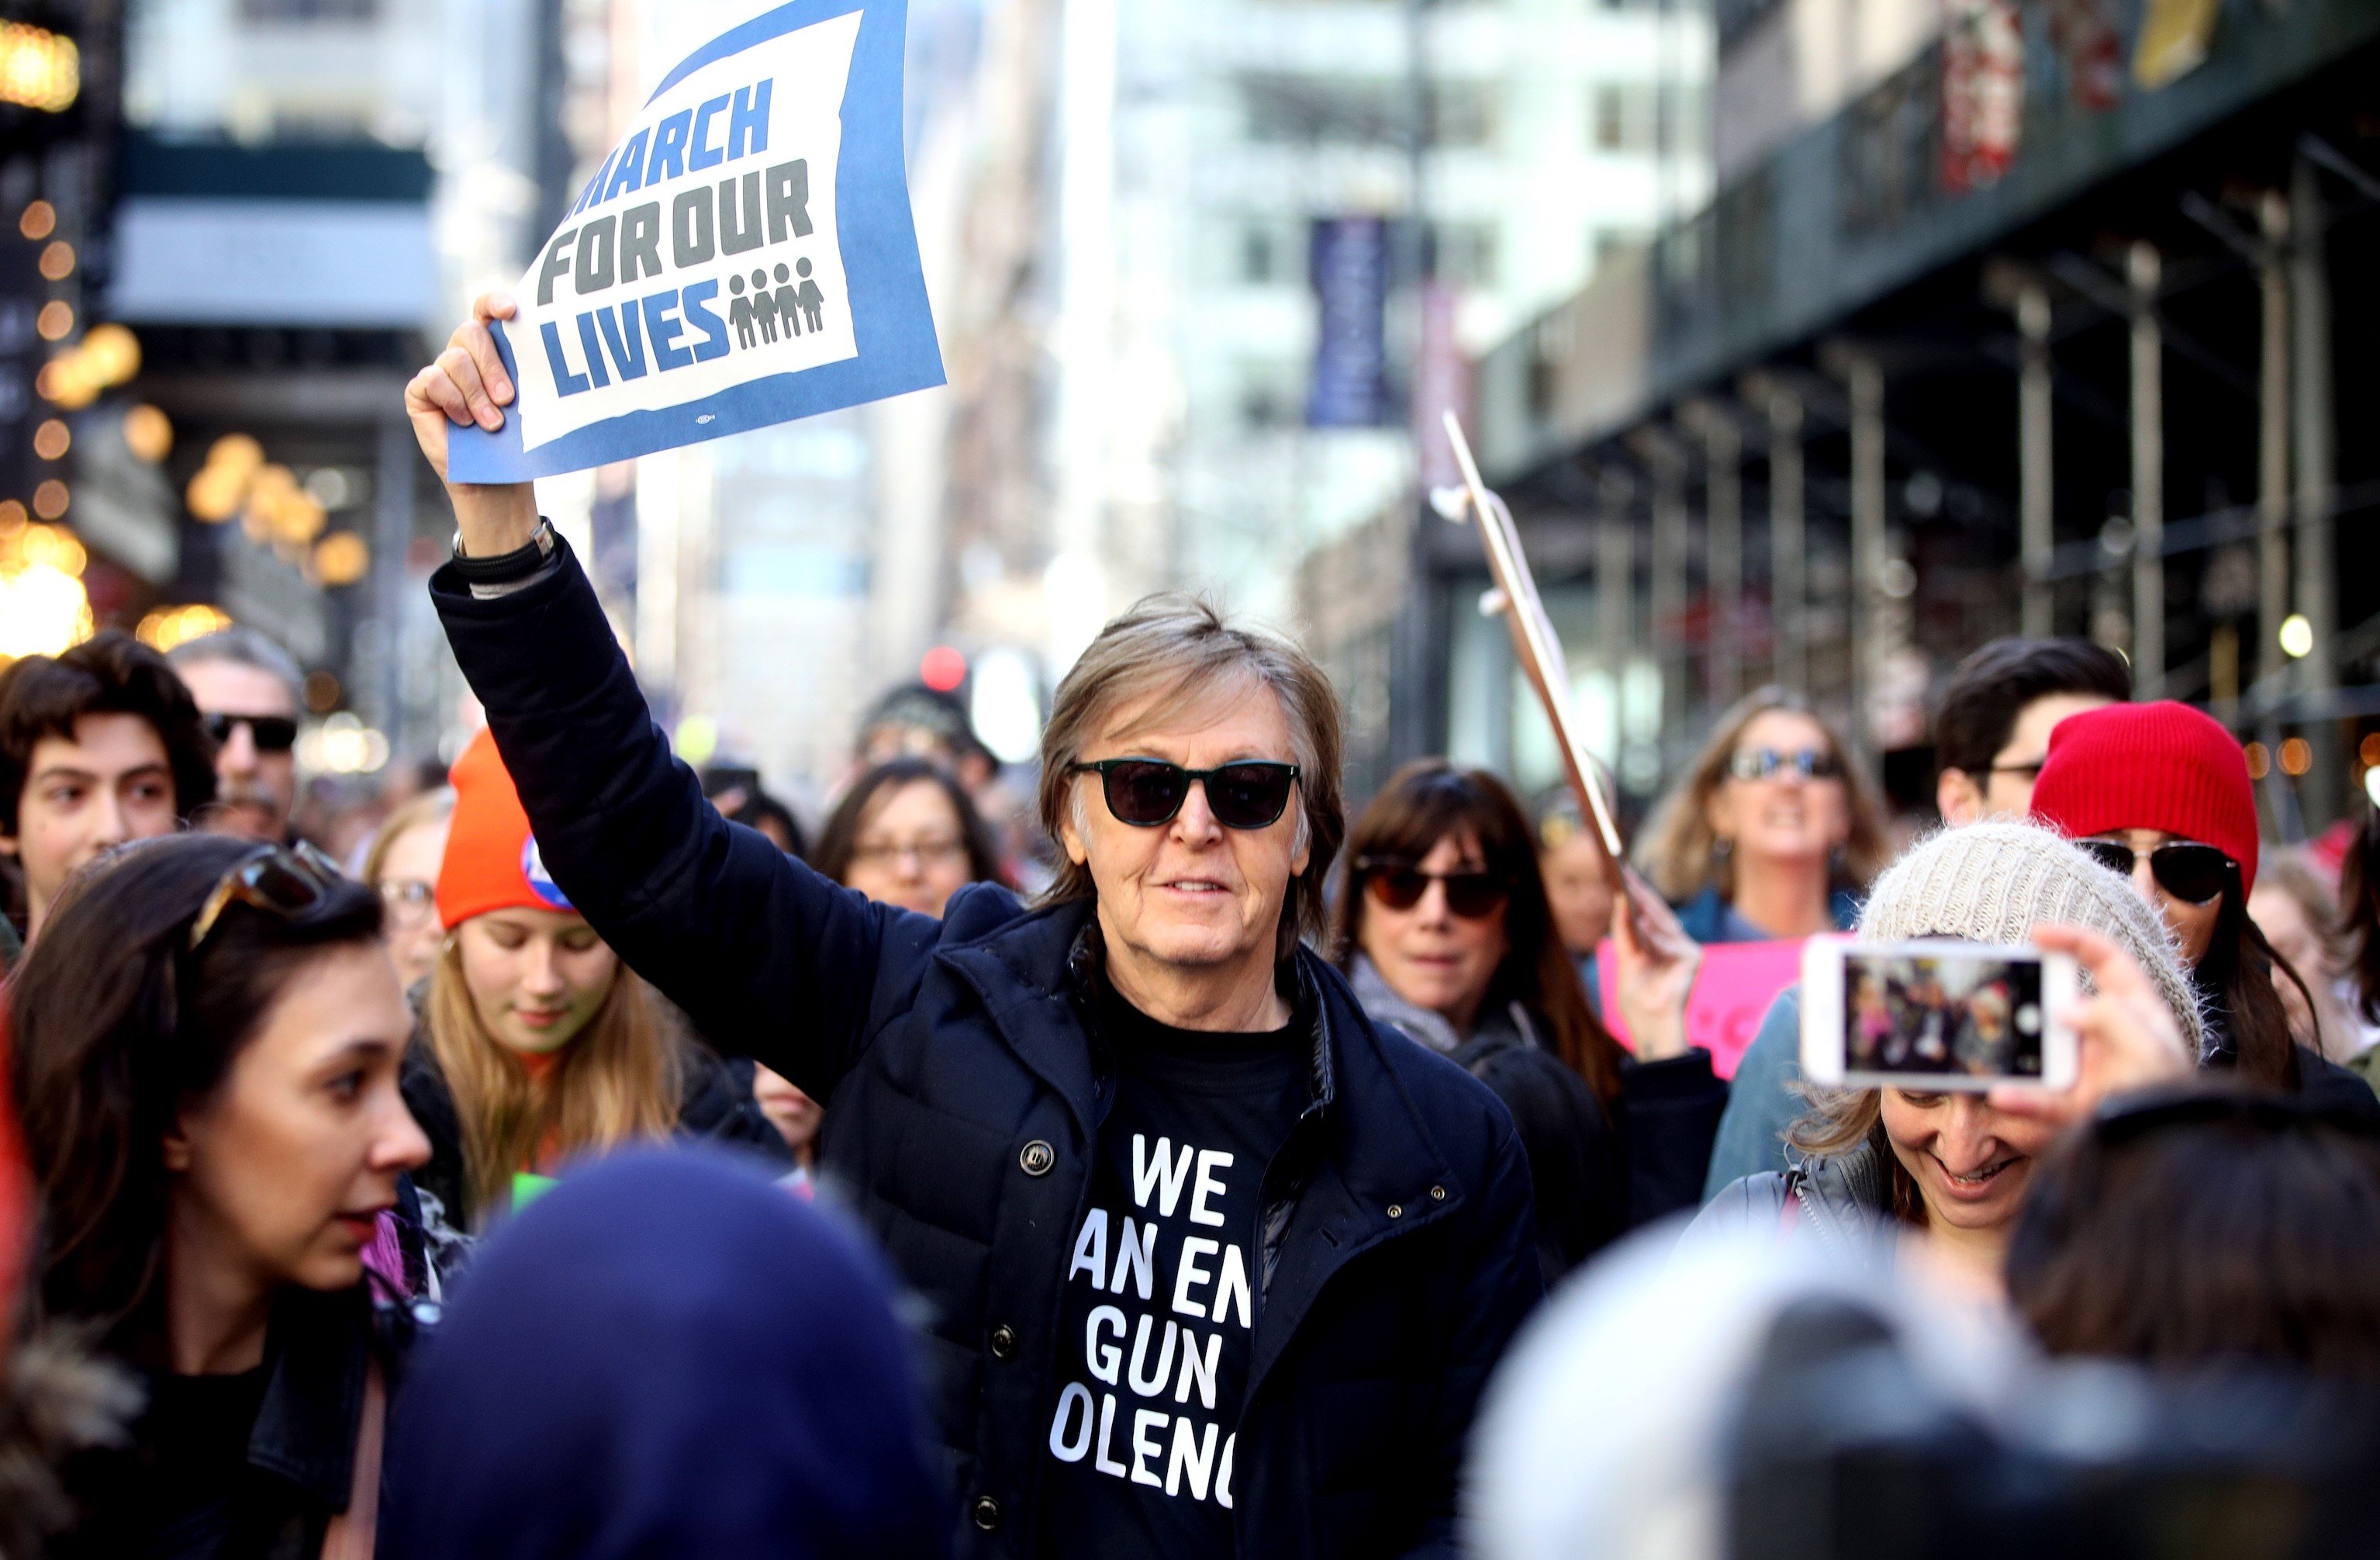 Paul McCartney attends the 'March For Our Lives" protest against gun violence in New York City